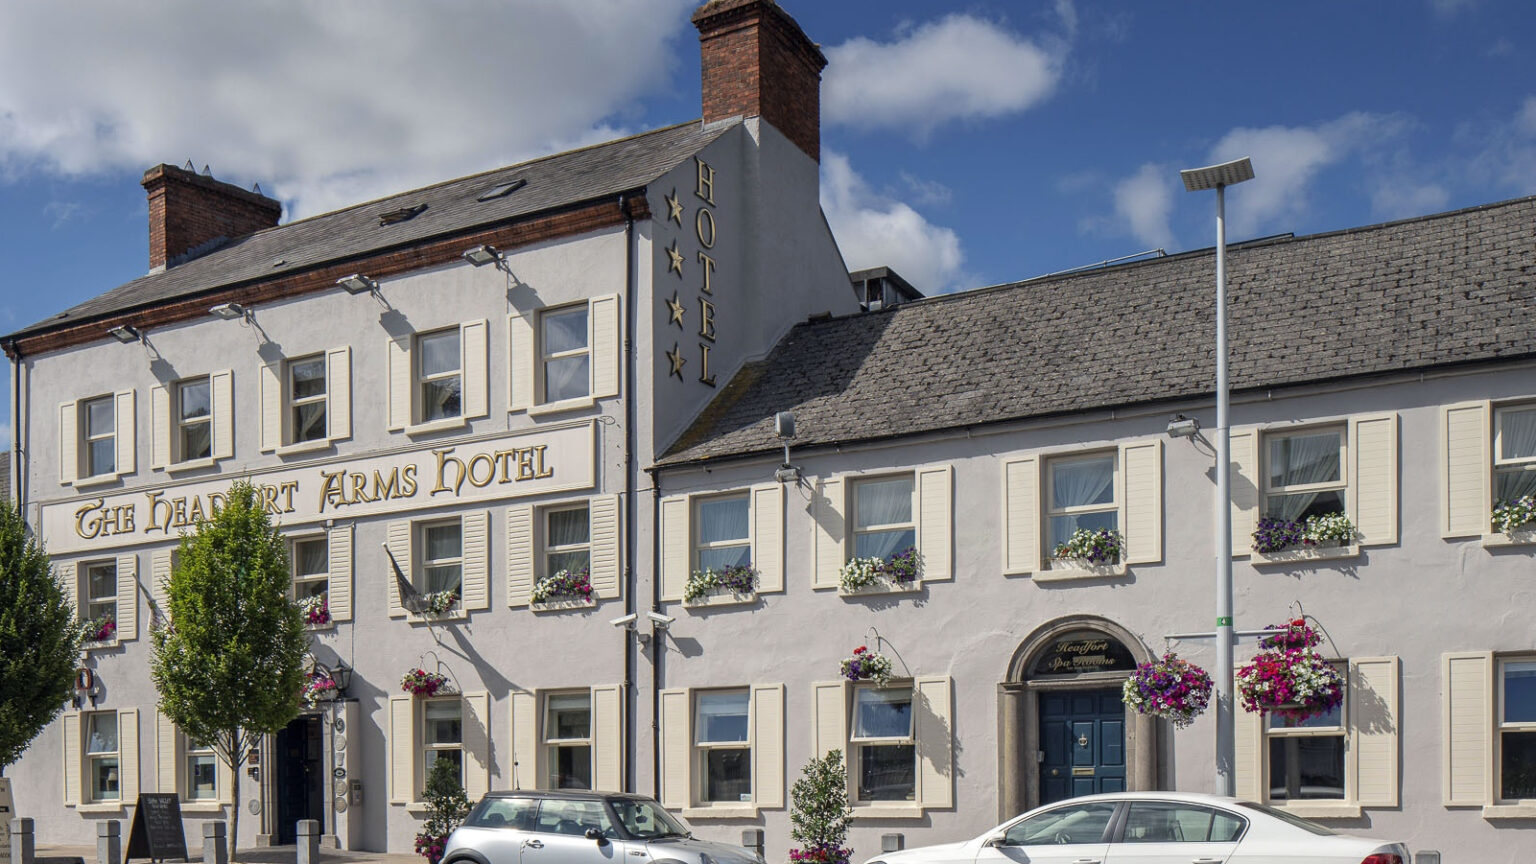 Headfort Arms Hotel, Kells, Co. Meath: Exterior street view in daylight